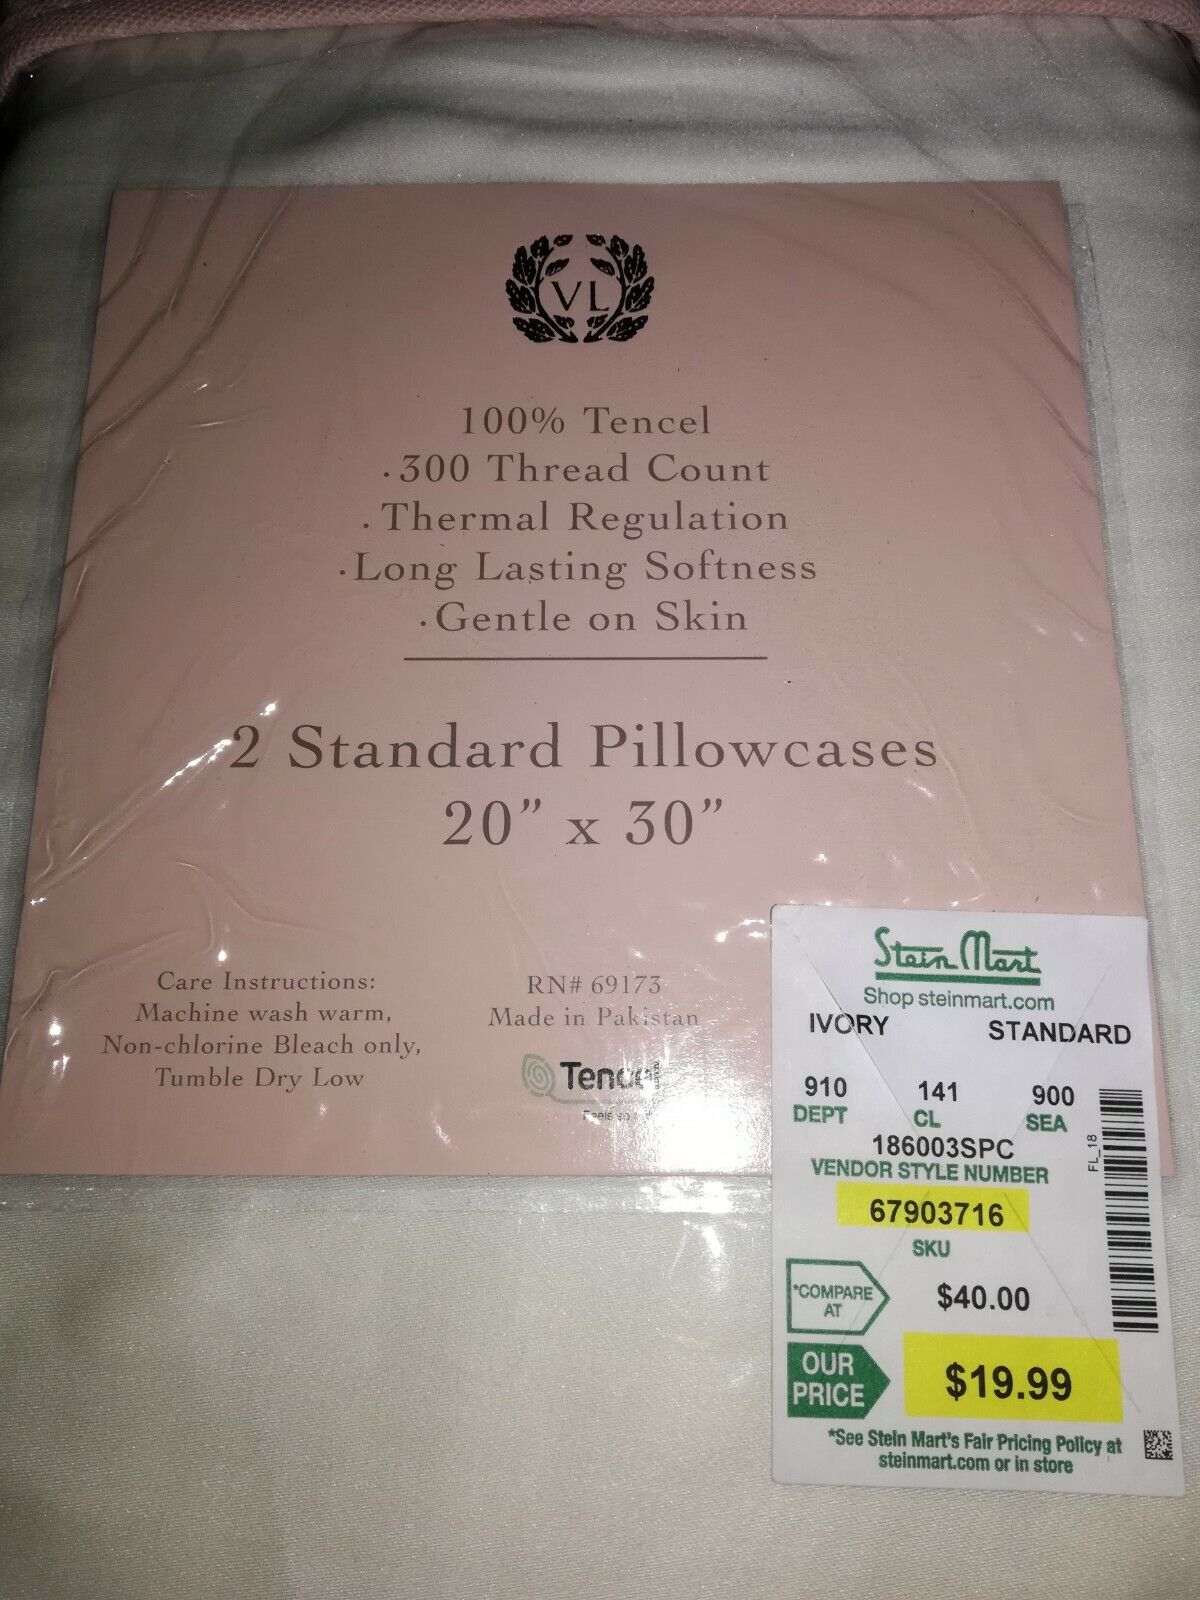 New In Package Villa Lugano "100% Tencel" 2 Standard Pillowcases MSRP $40 